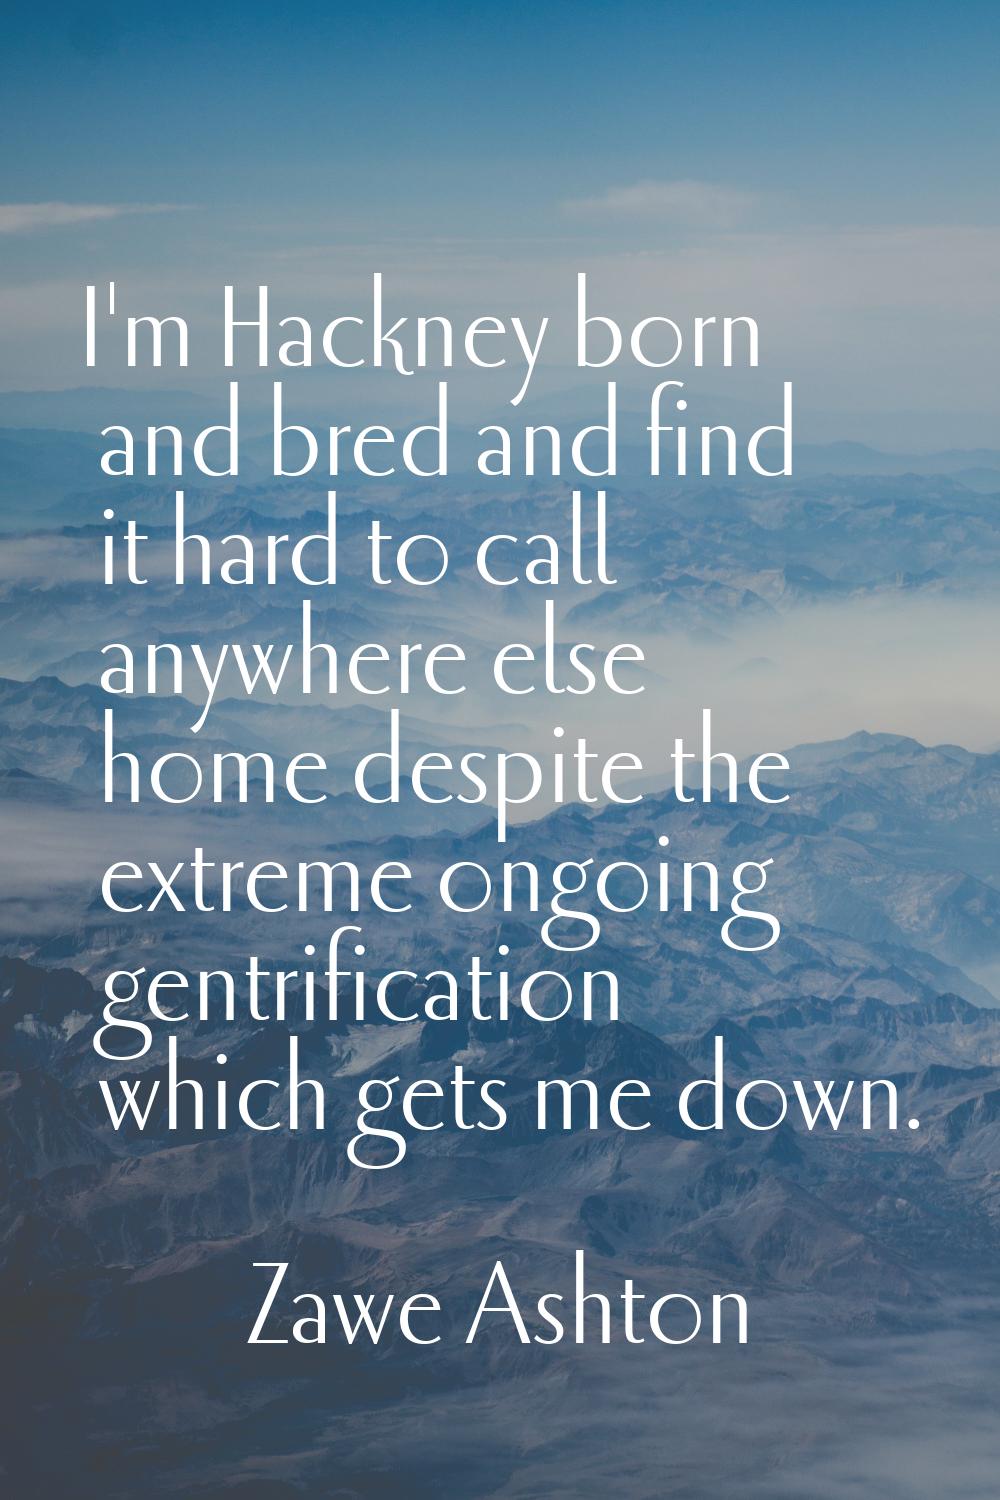 I'm Hackney born and bred and find it hard to call anywhere else home despite the extreme ongoing g